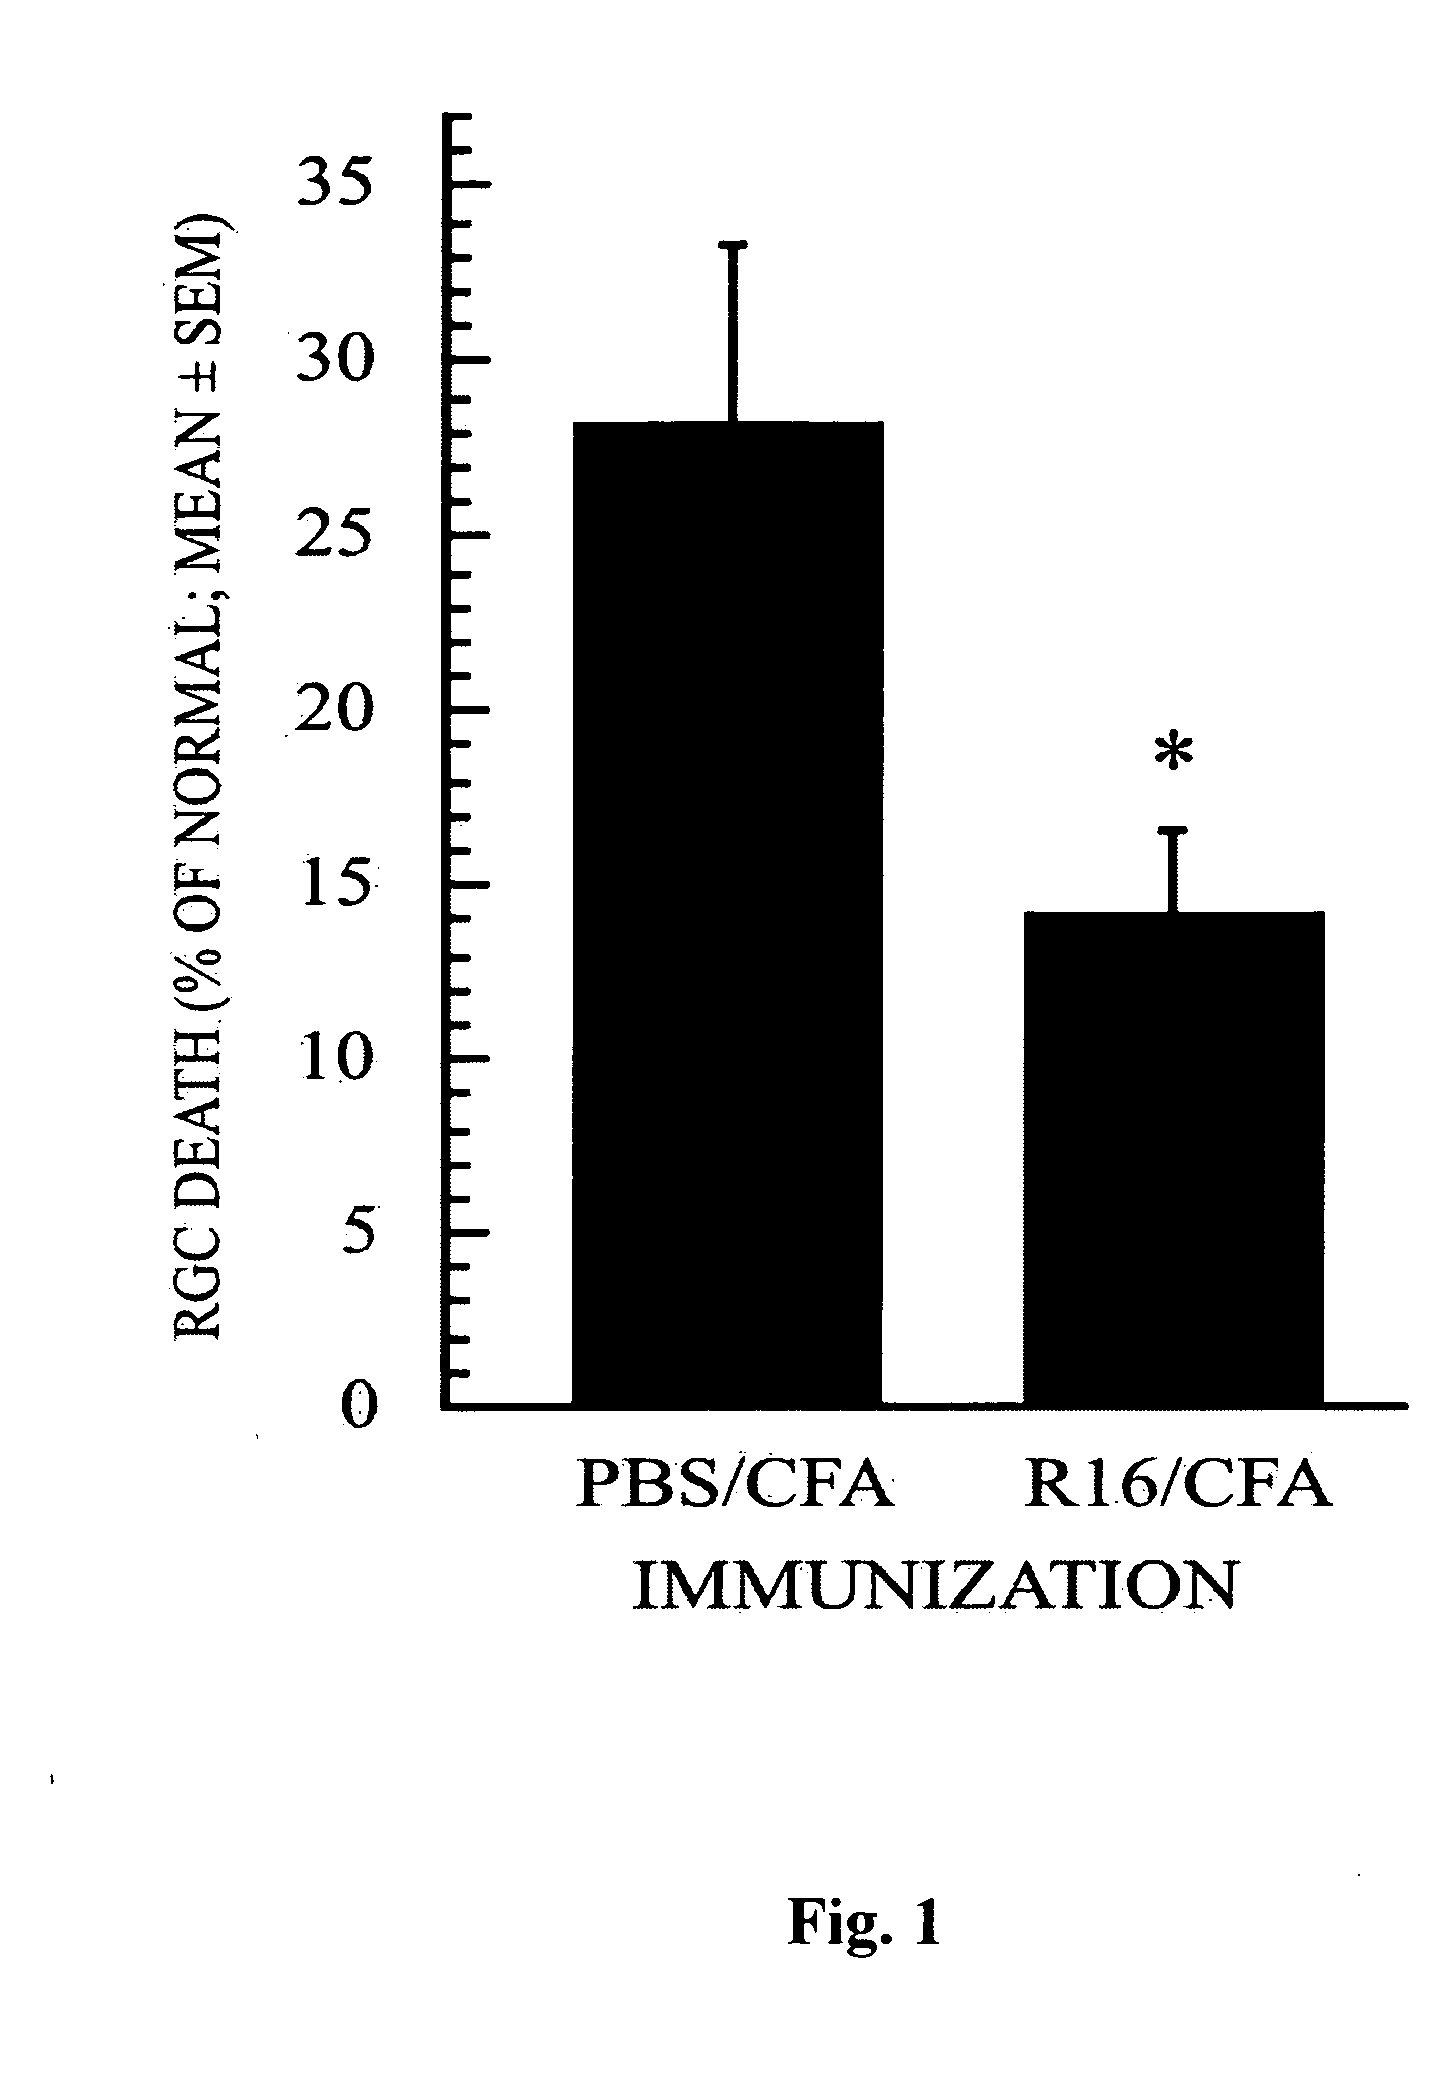 Use of an organ-specific self-pathogen for treatment of a non-autoimmune disease of said organ